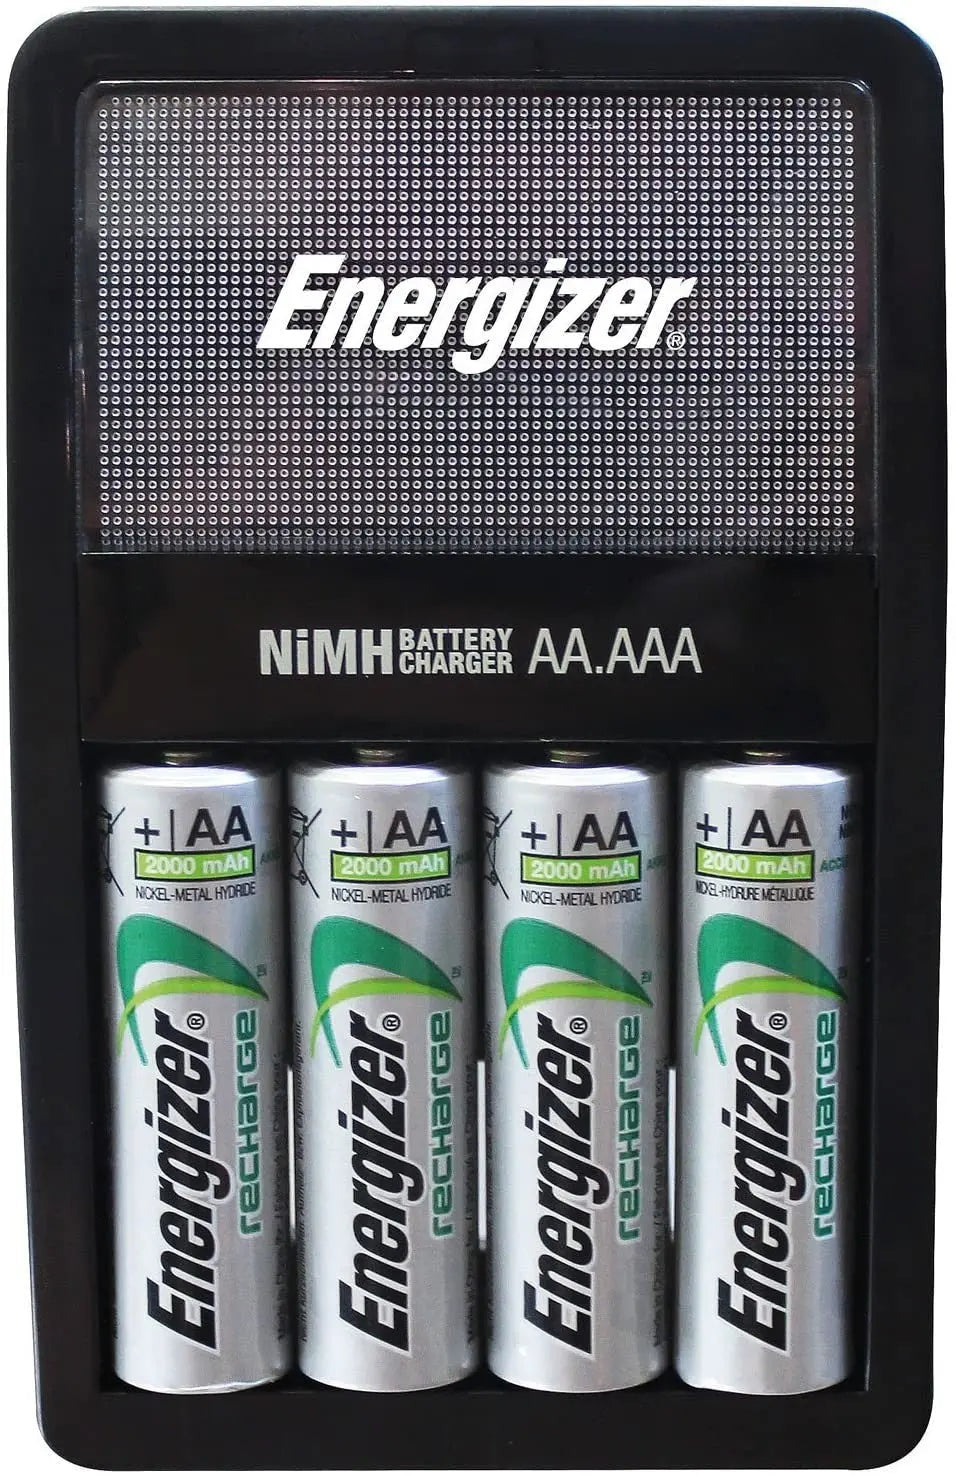 Energizer Maxi Charger French